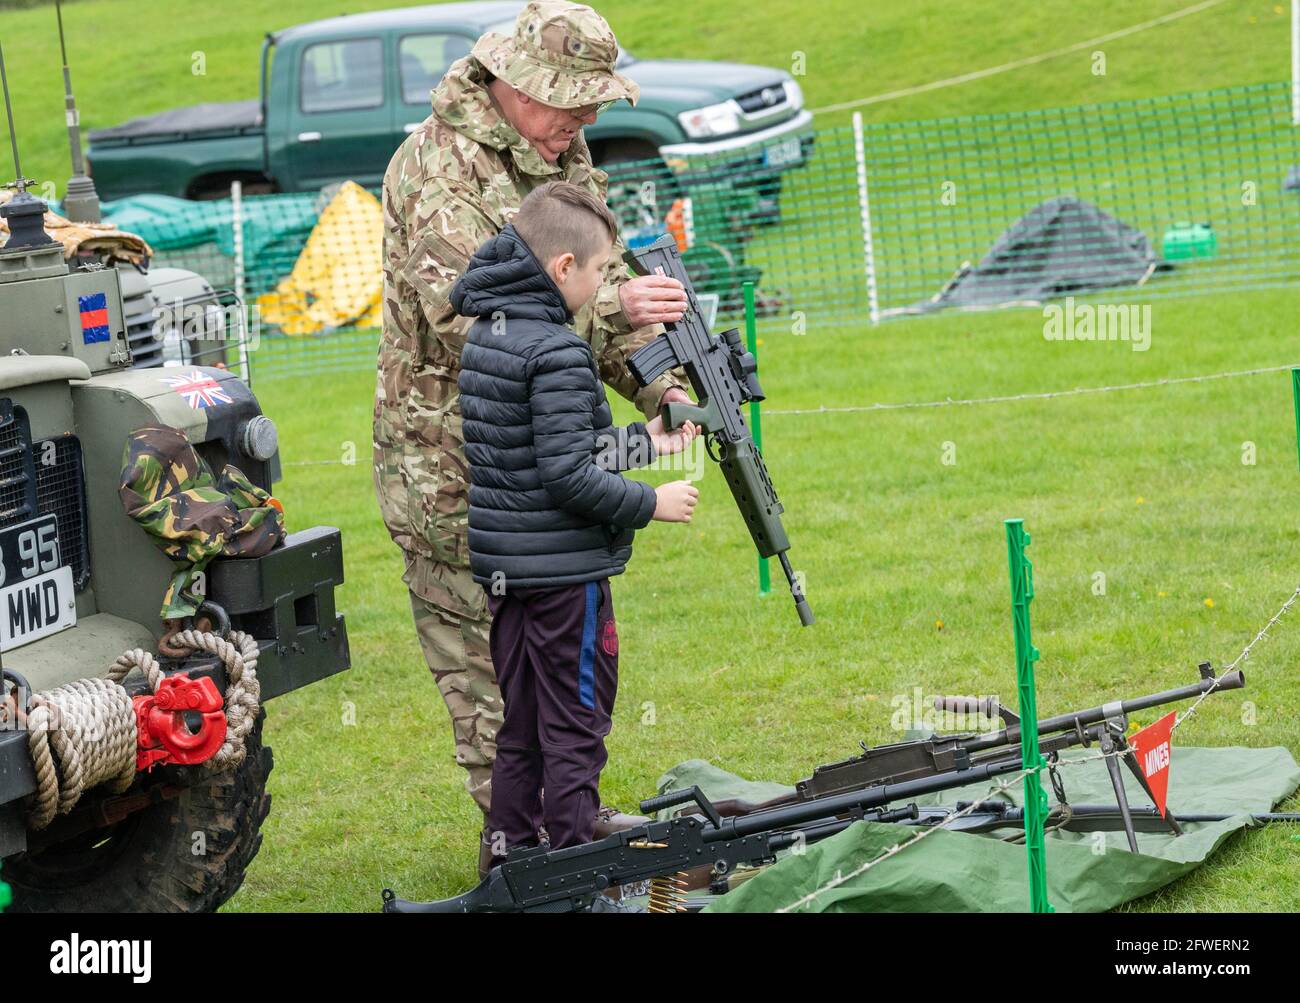 Brentwood Essex 22nd May 2021 The Weald Park Country show, Weald Festival of Dogs, Weald Festival of cars, Weald Country Park, Brentwood Essex, army display, Credit: Ian Davidson/Alamy Live News Stock Photo